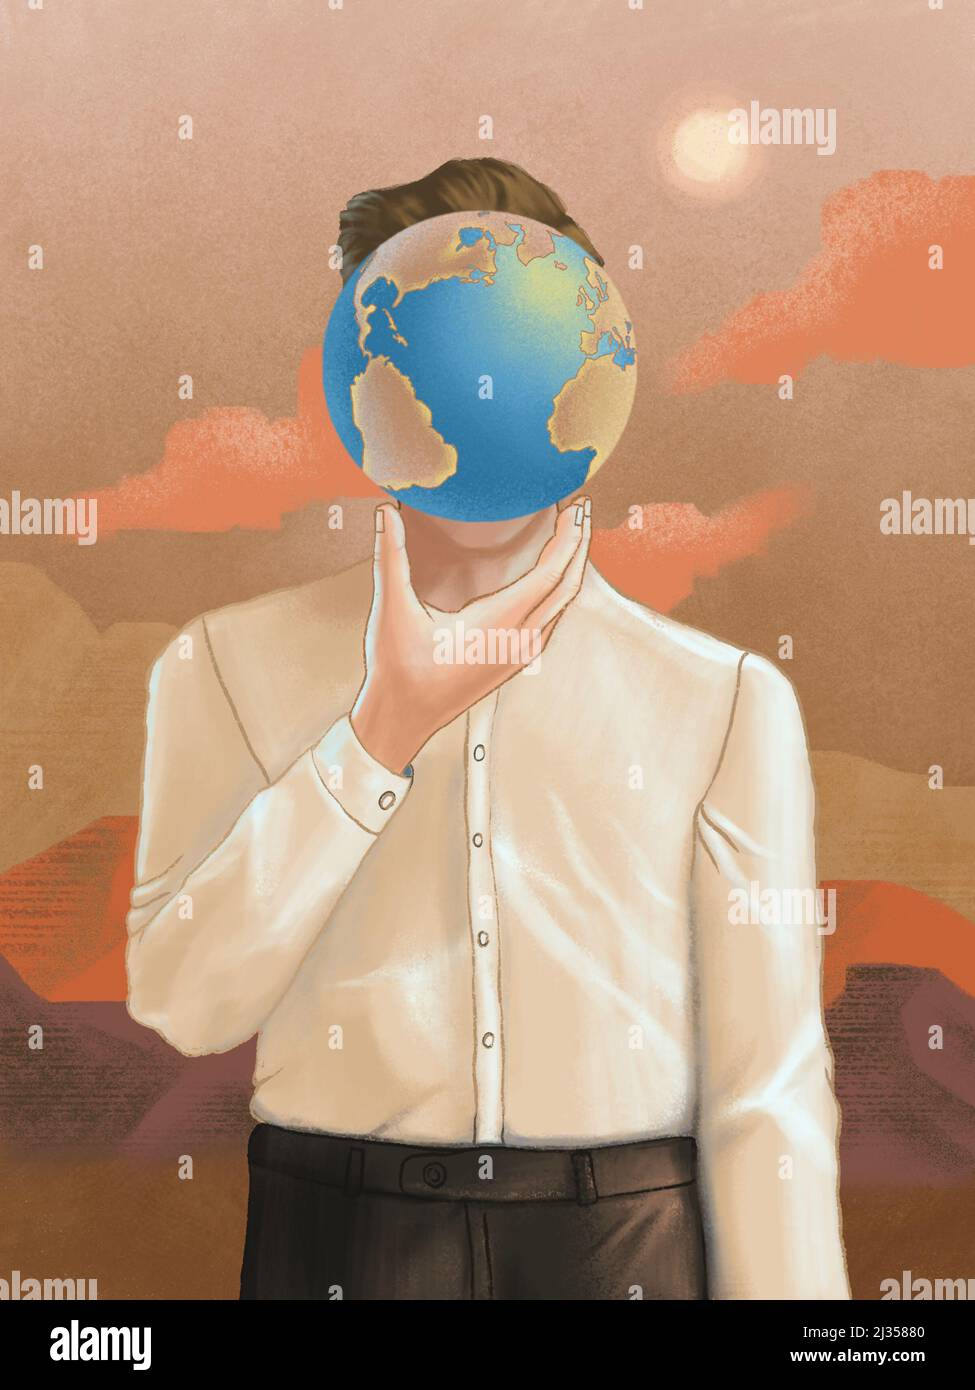 Man holding an Earth globe in forn of his head. Digital illustration. Stock Photo